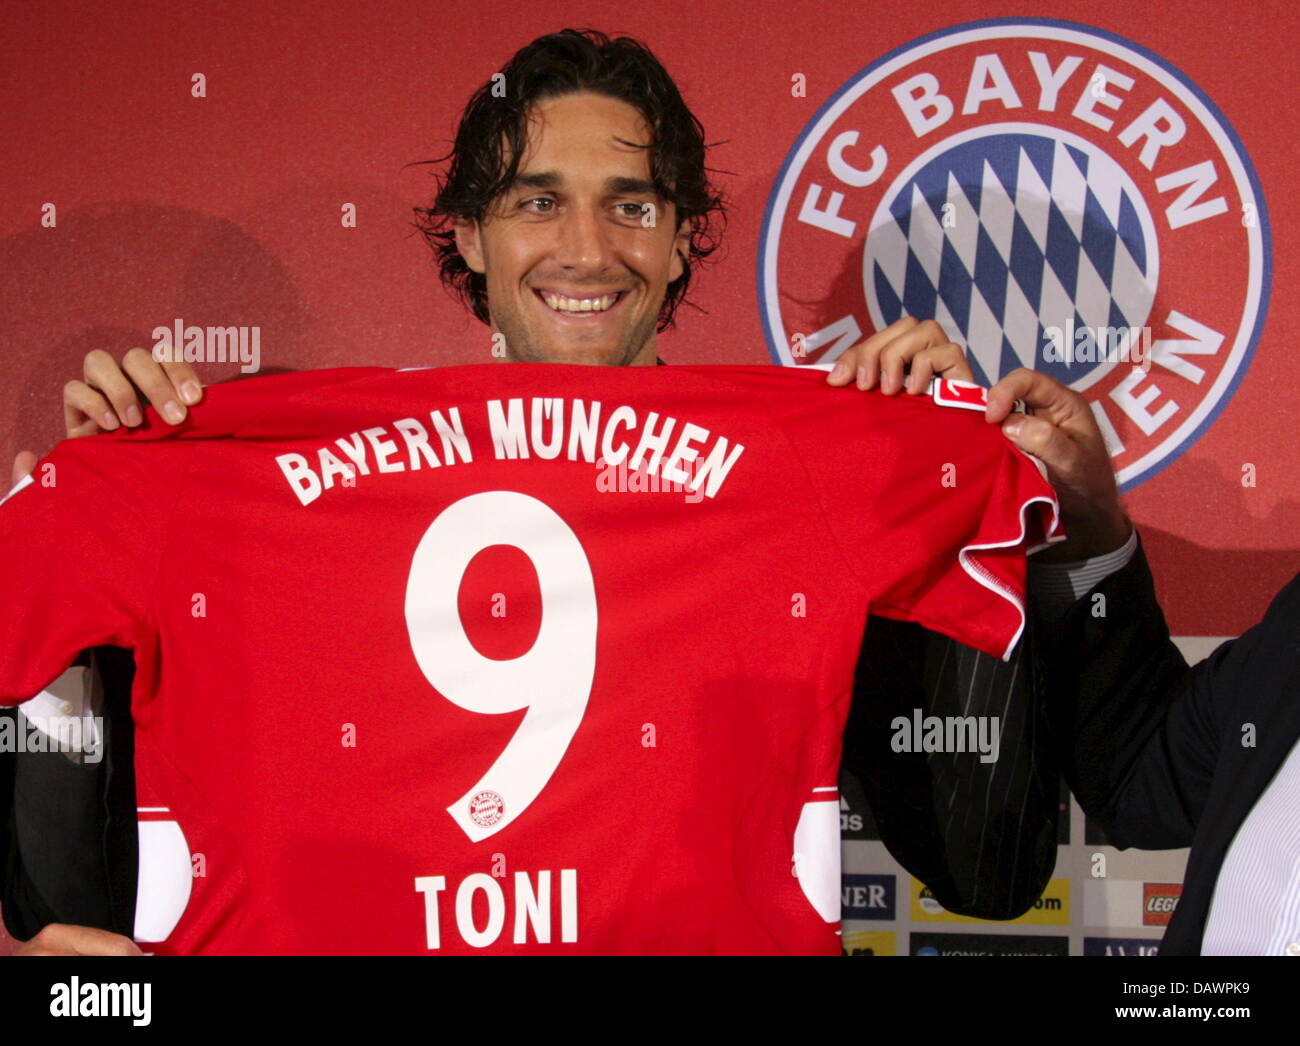 Bundesliga club Bayern Munich's new signed striker Luca Toni smiles with  his jersey at the official presentation in Munich, Germany, 07 June 2007.  Munich closed the transfer from Seria A club Fiorentina